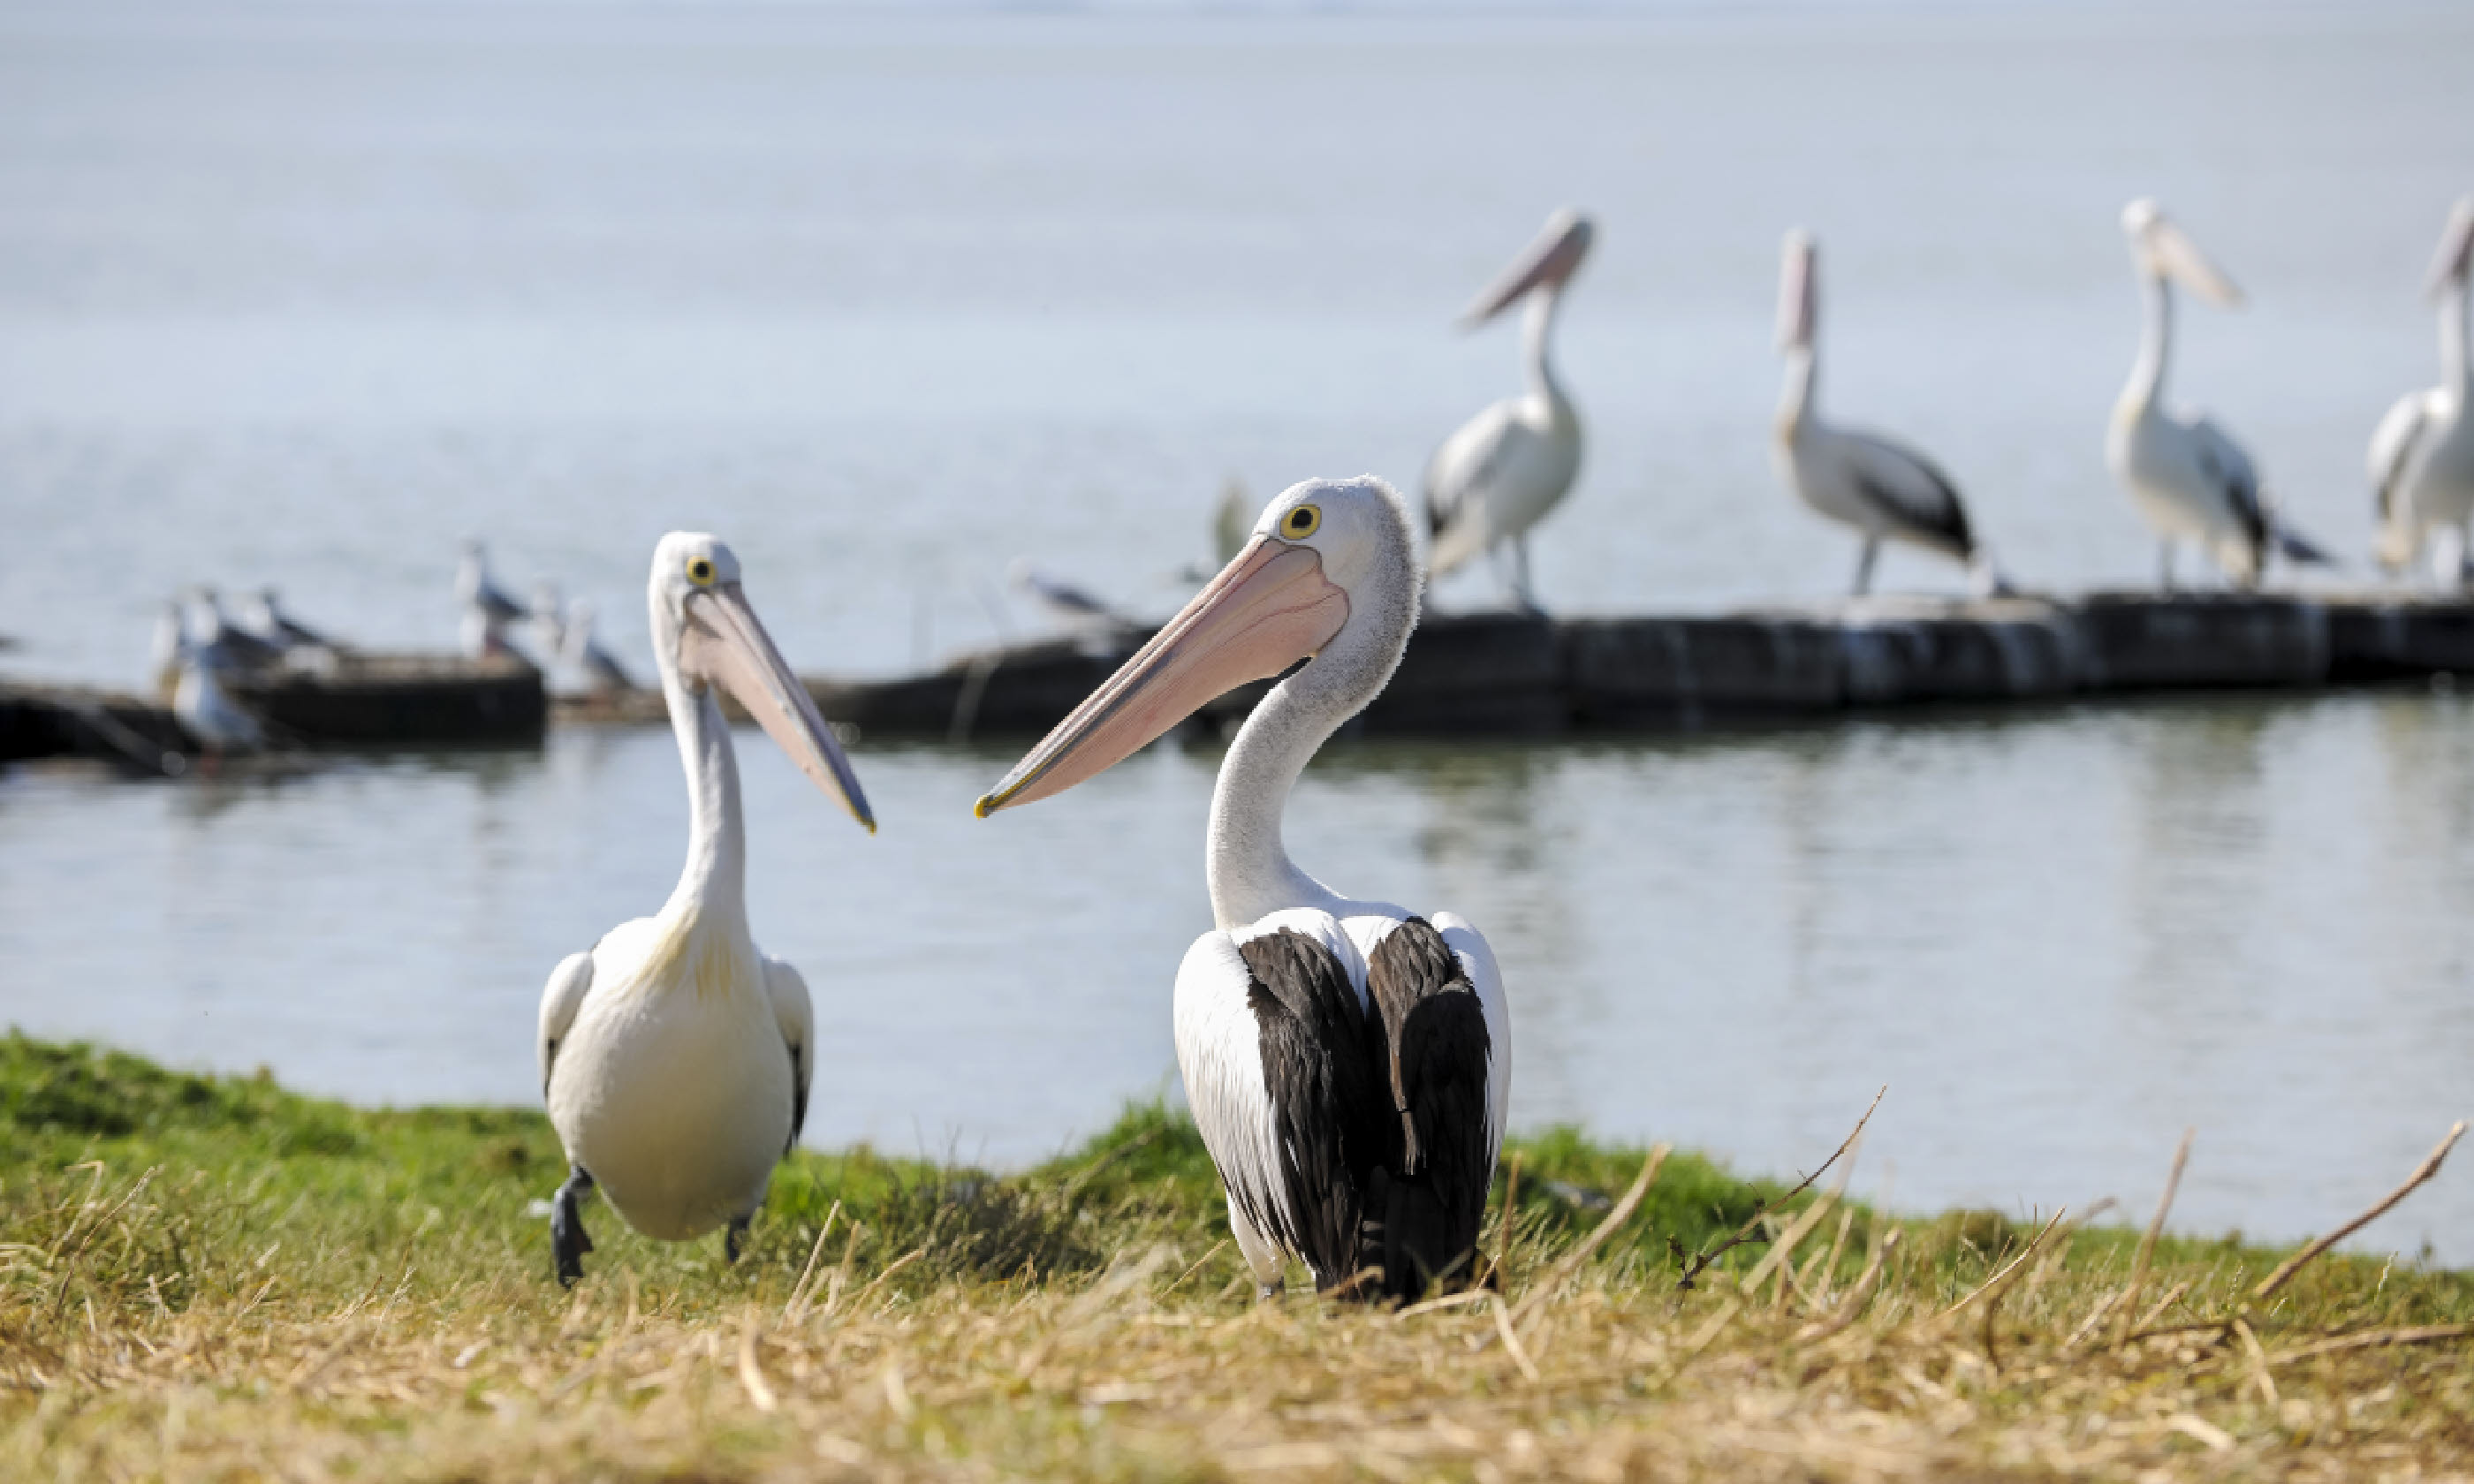 Pelicans in Coorong National Park (SATC)